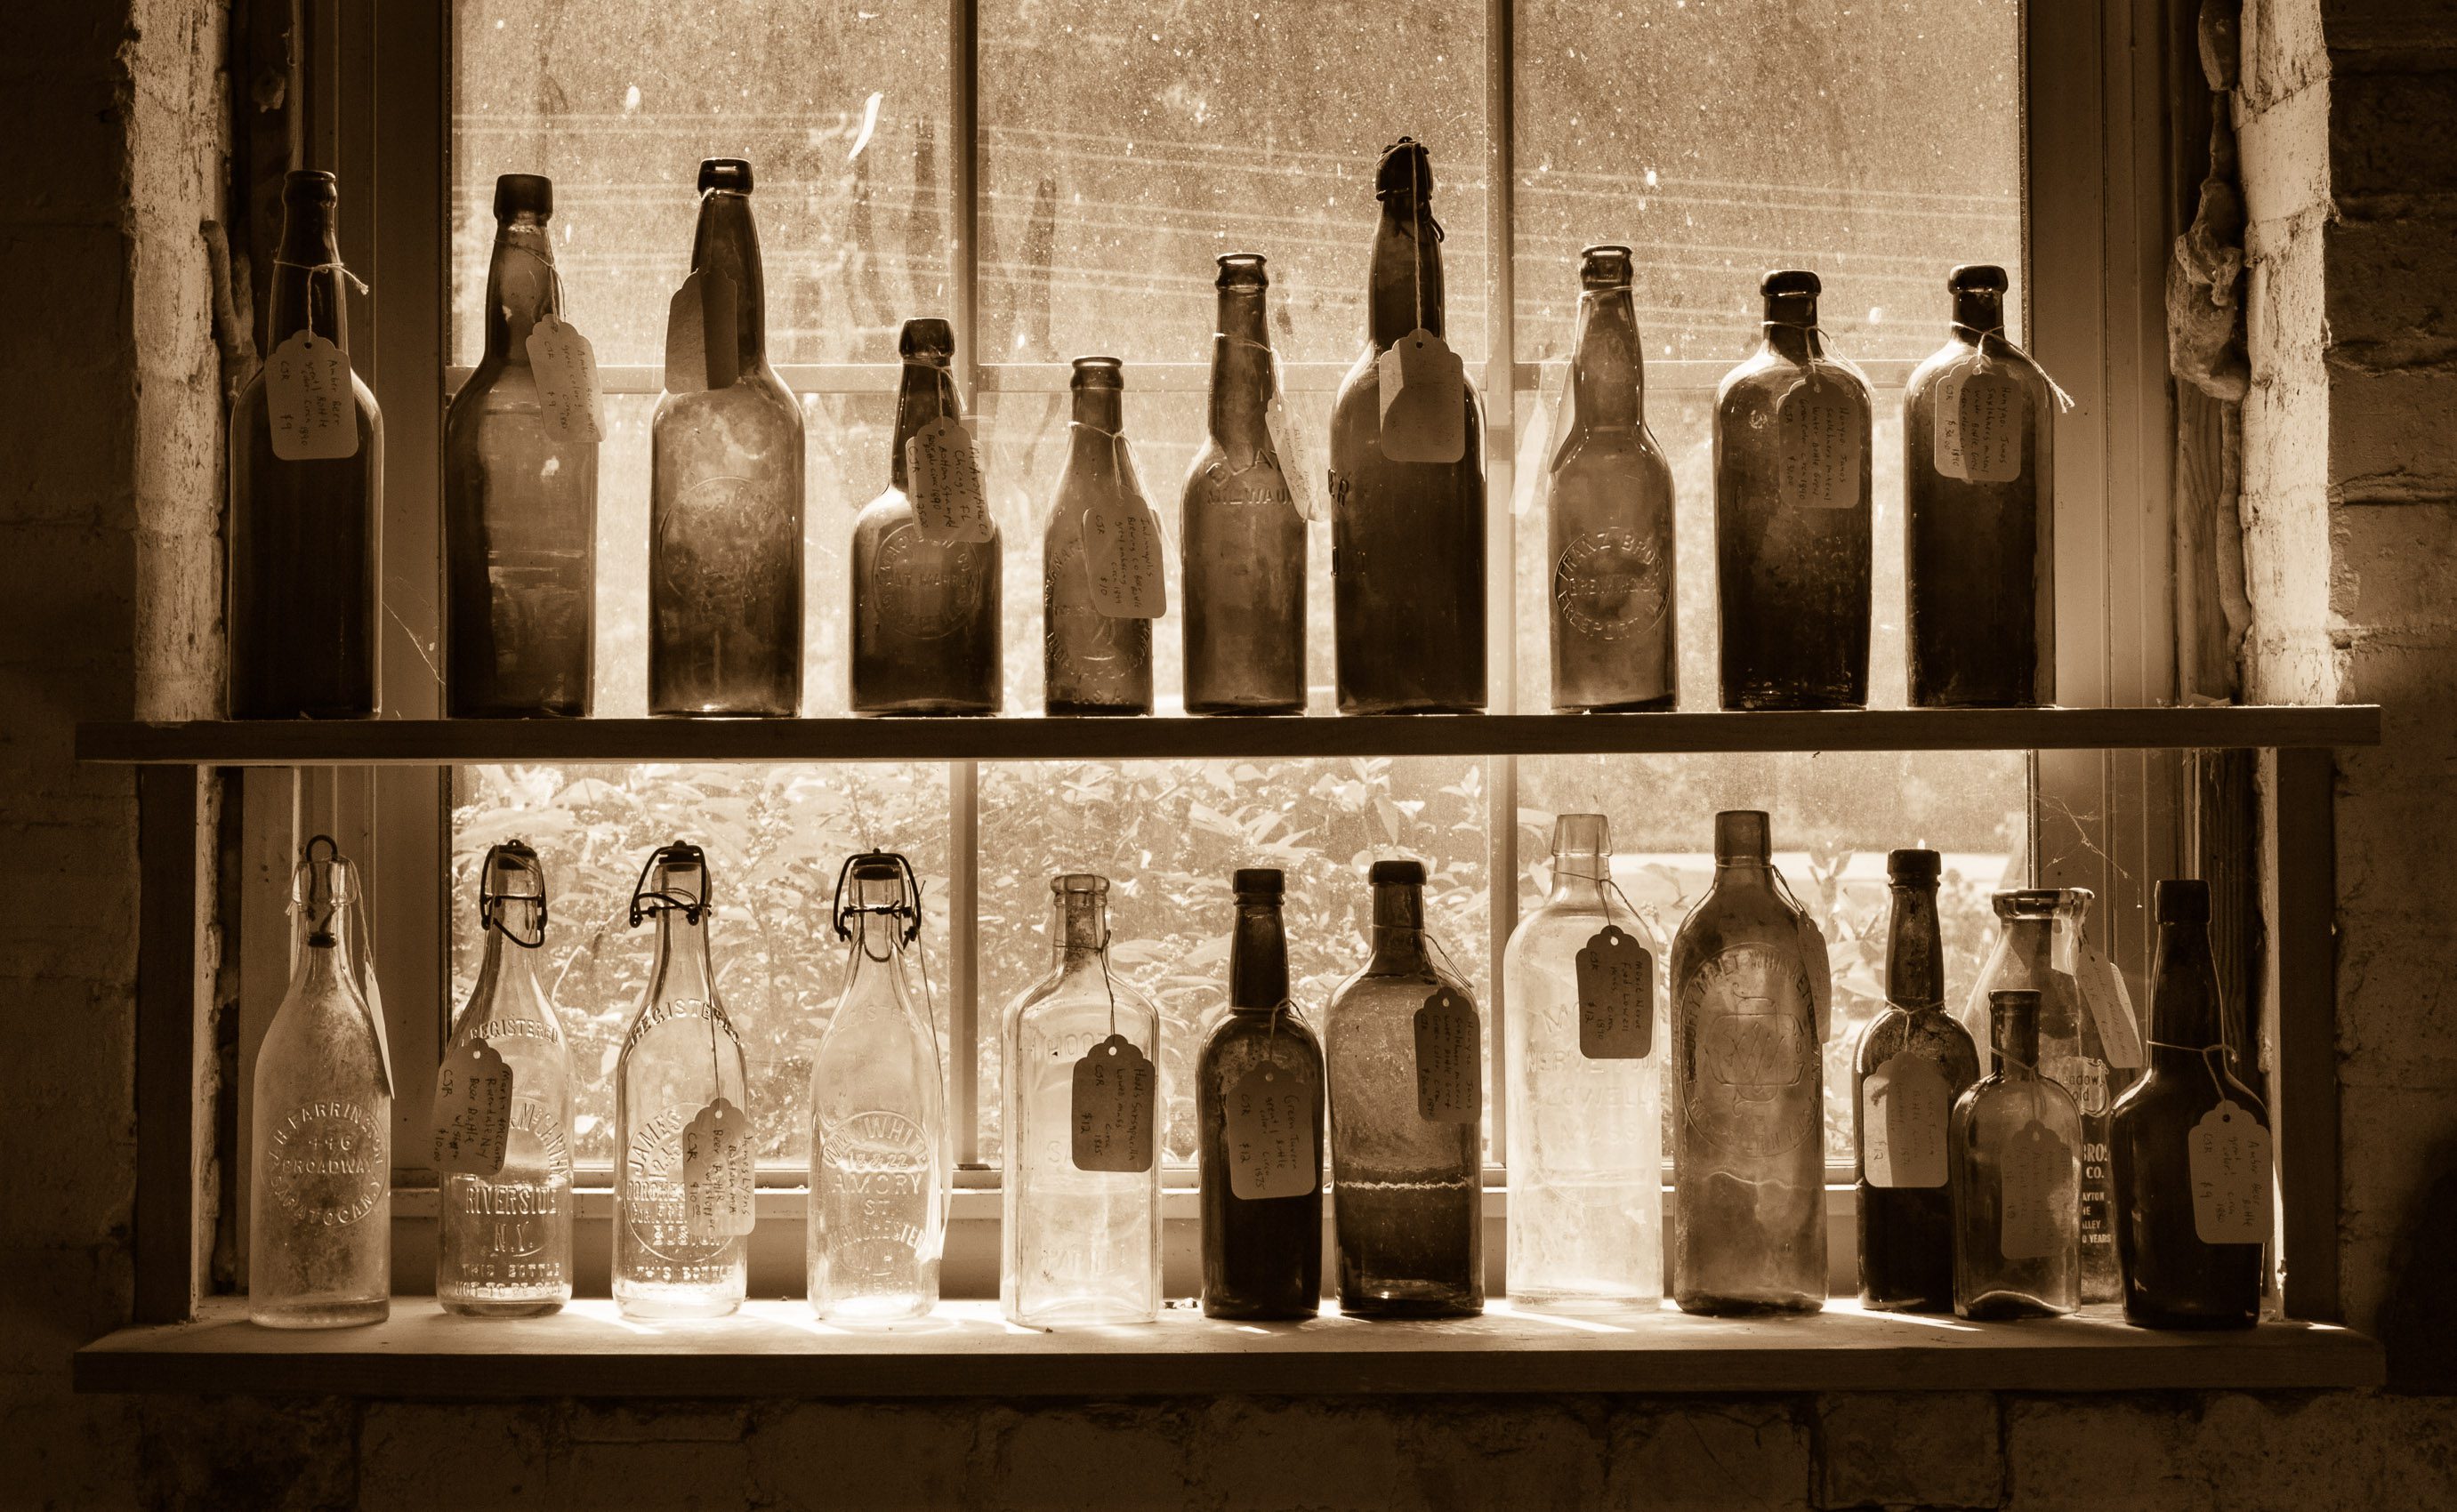 Shelves of antique glass bottles in a vintage store in the River Arts District, Asheville, North Carolina, USA. NC010